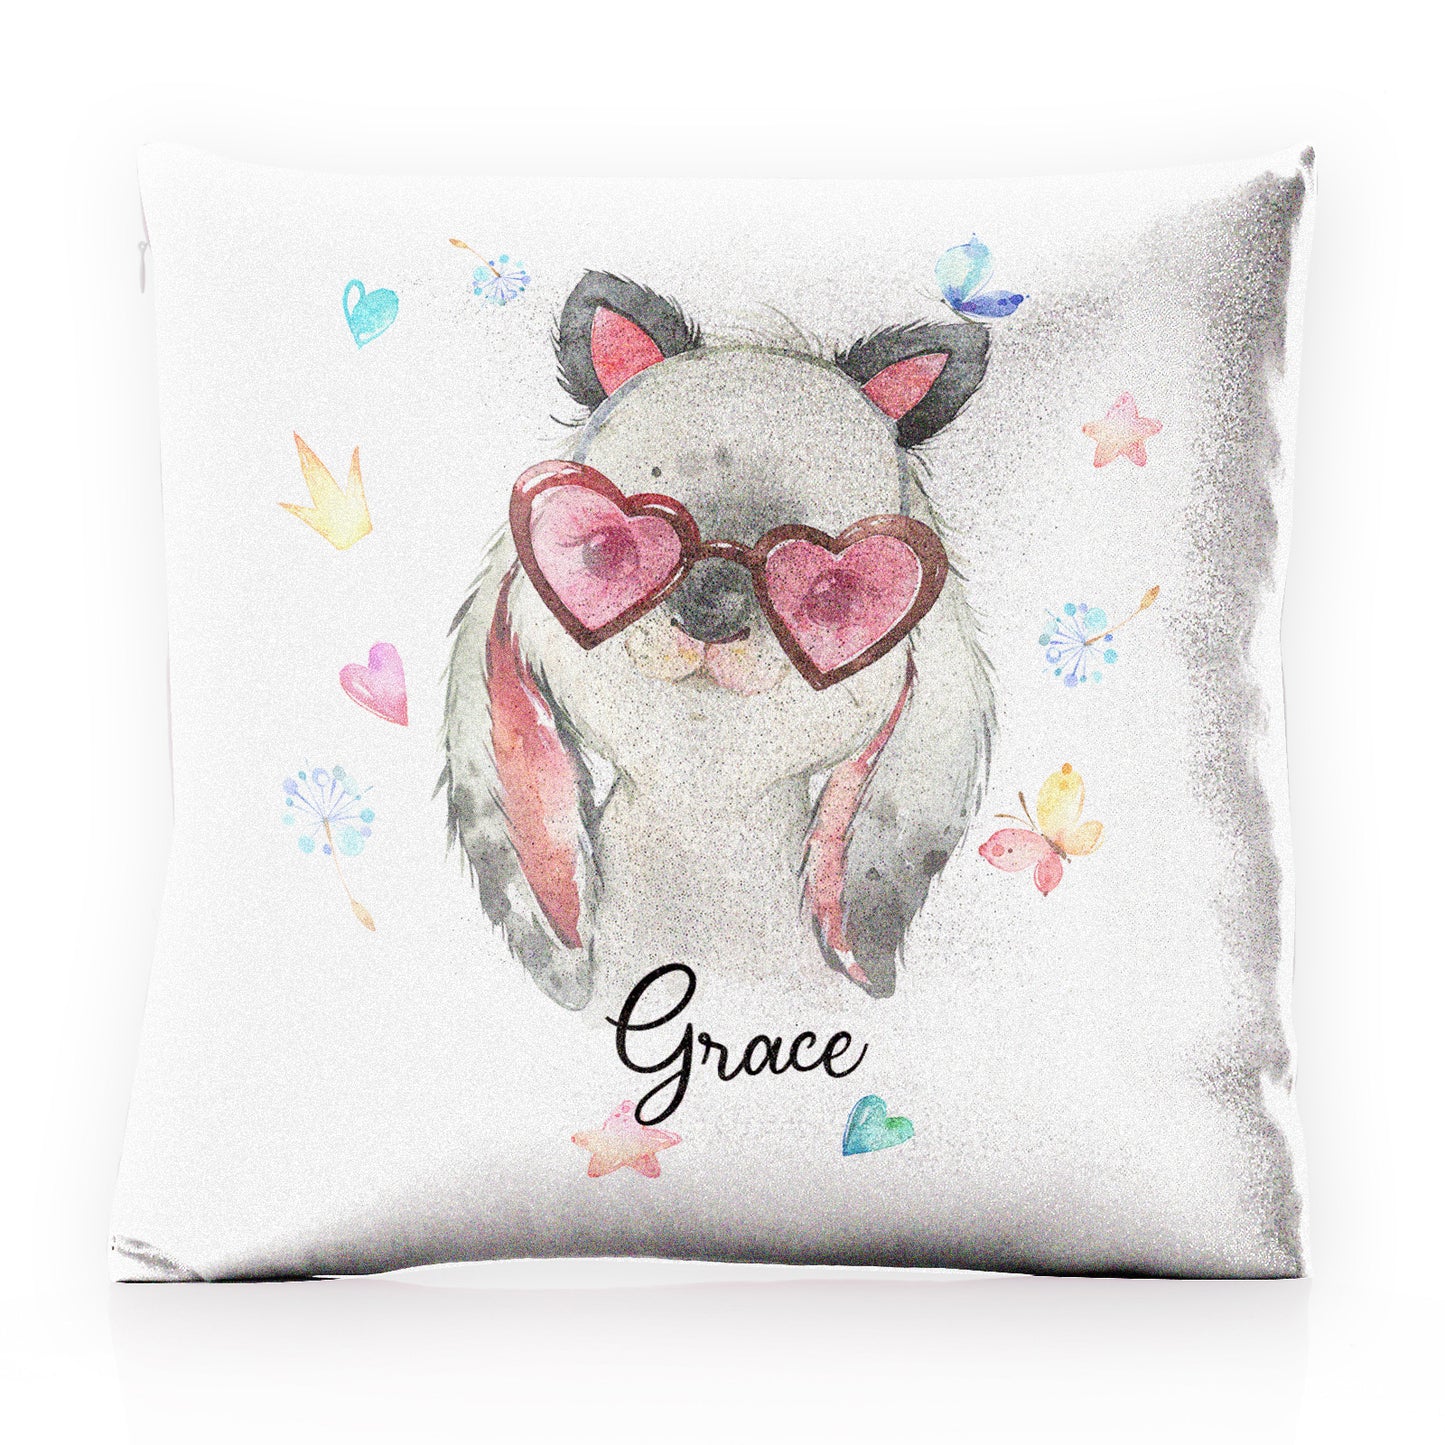 Personalised Glitter Cushion with Grey Rabbit with Cat ears and Pink Heart Glasses and Cute Text